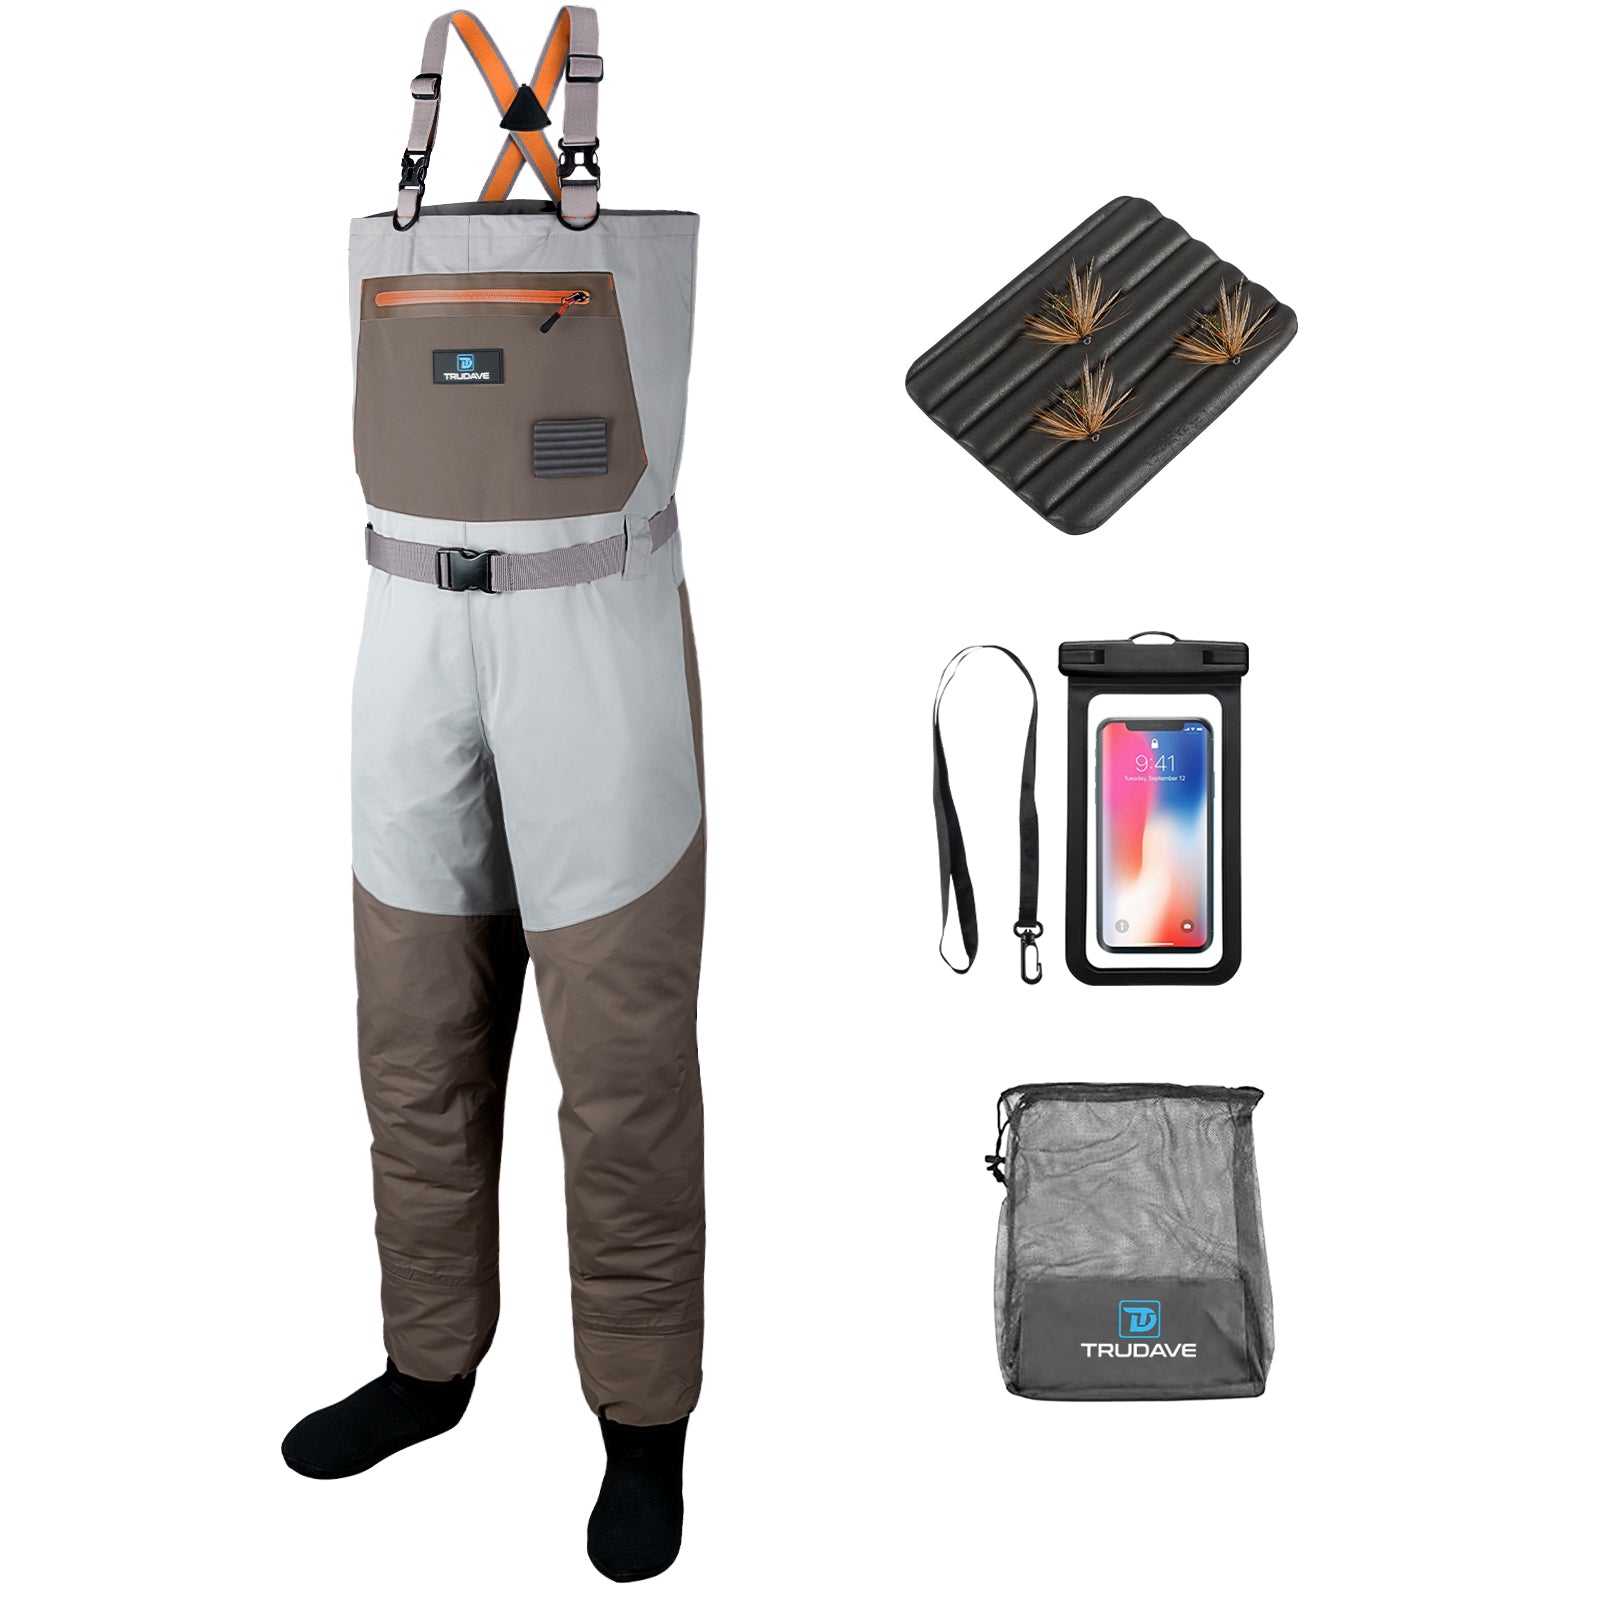 Trudave Stocking Foot Breathable Waders for Fly Fishing – TRUDAVE Gear